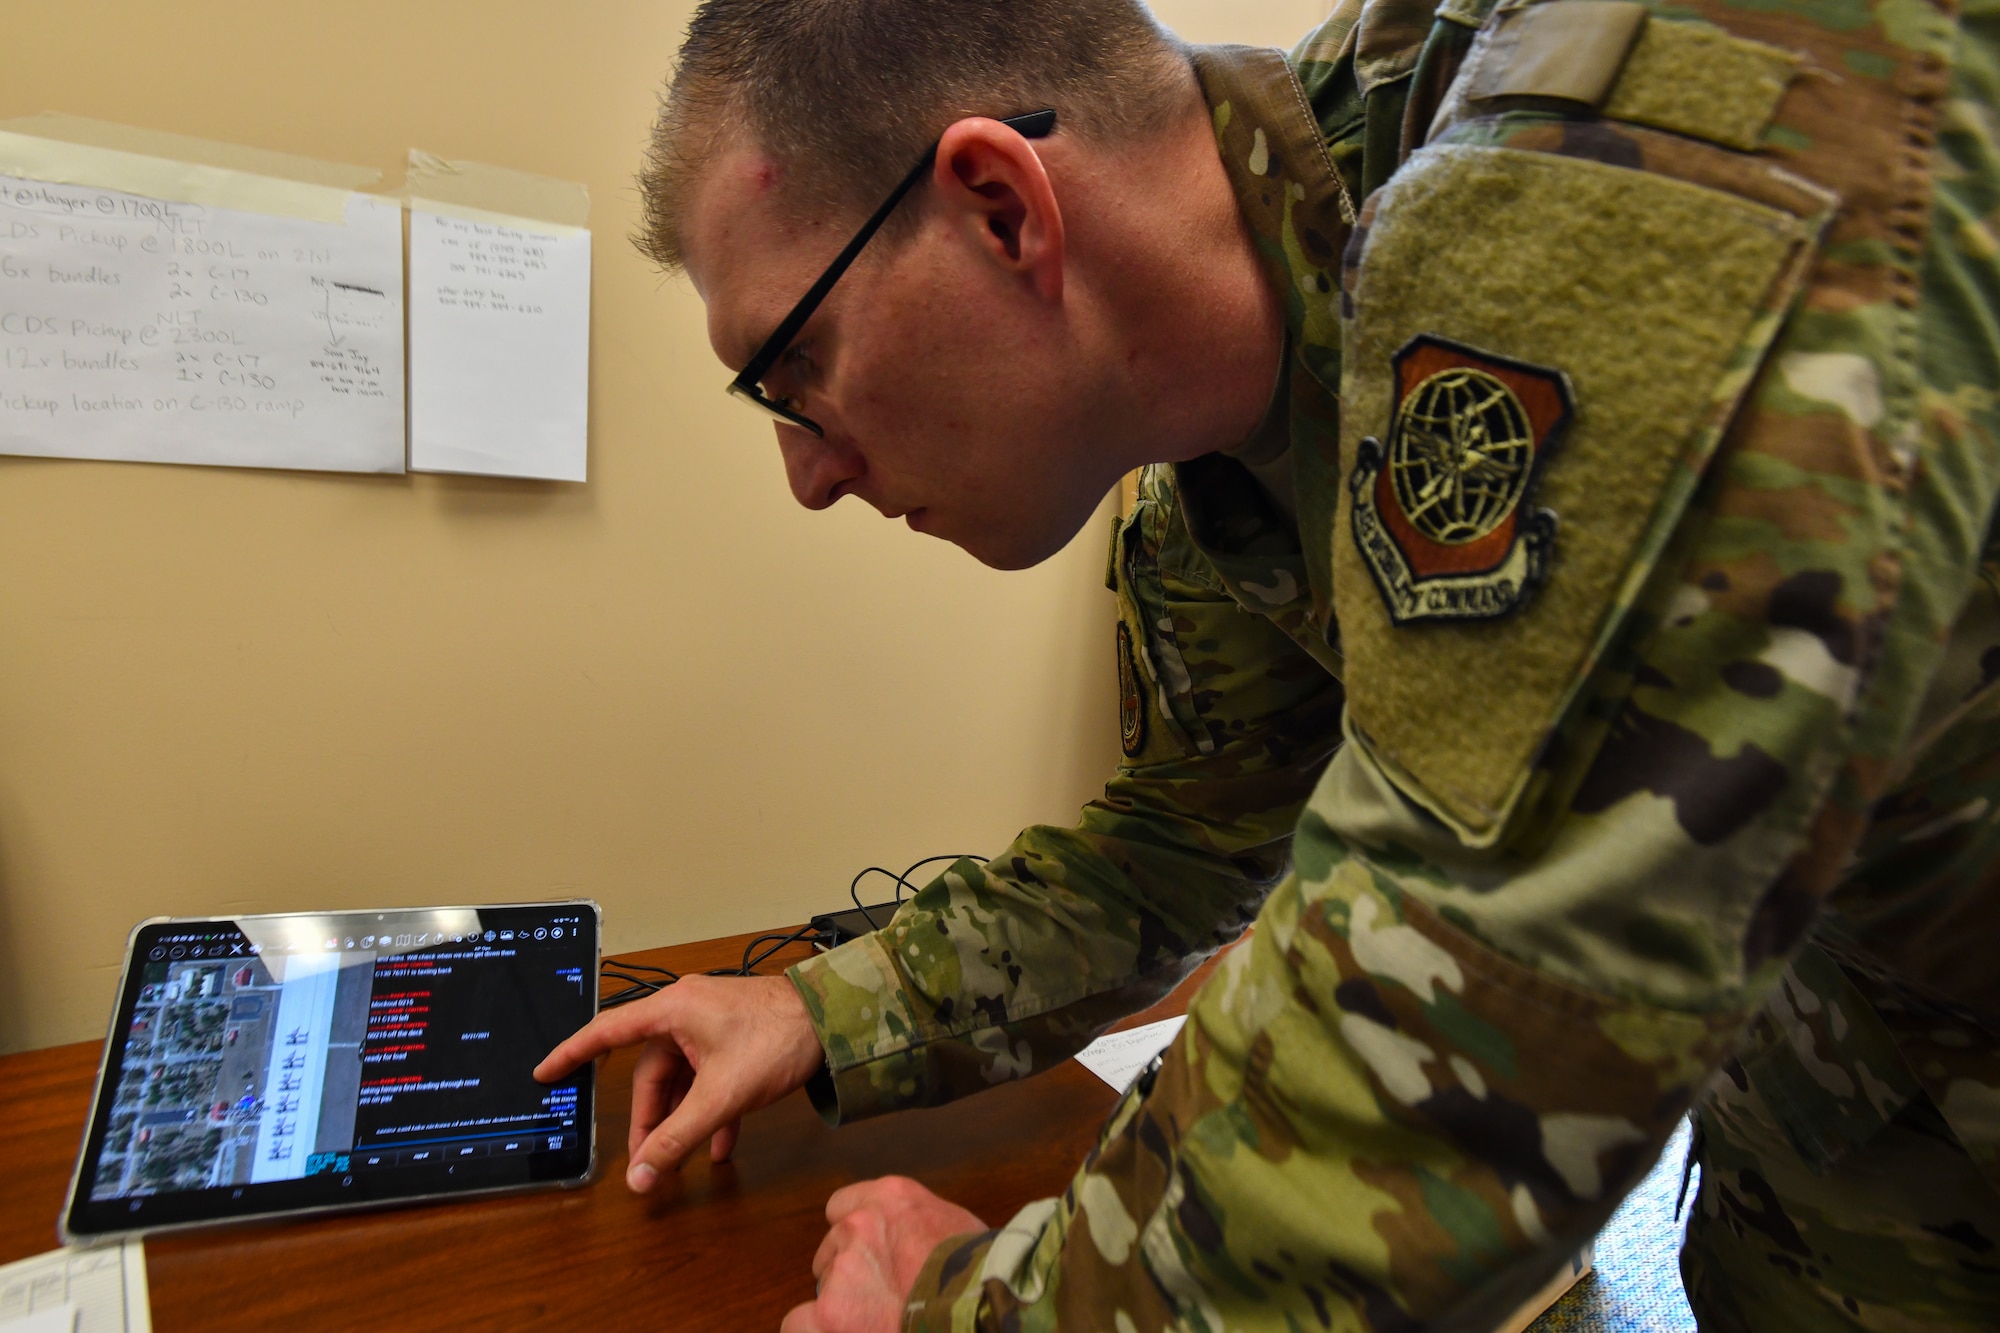 U.S. Air Force Tech. Sgt. Travis Alton, an Air Mobility Command command manager for Transportation Innovations, Systems and Futures, explains how to use the Android Team Logistics Awareness Switch during Exercise Mobility Guardian 2021 at the Alpena Combat Readiness Training Center, Michigan, May 21, 2021. AMC is collaborating with the Air Force Research Laboratory to modernize the logistics force, developing digitally-adept Airmen by updating processes which have remained largely unchanged for more than a decade. (U.S. Air Force video by Tech. Sgt. Kentavist P. Brackin)